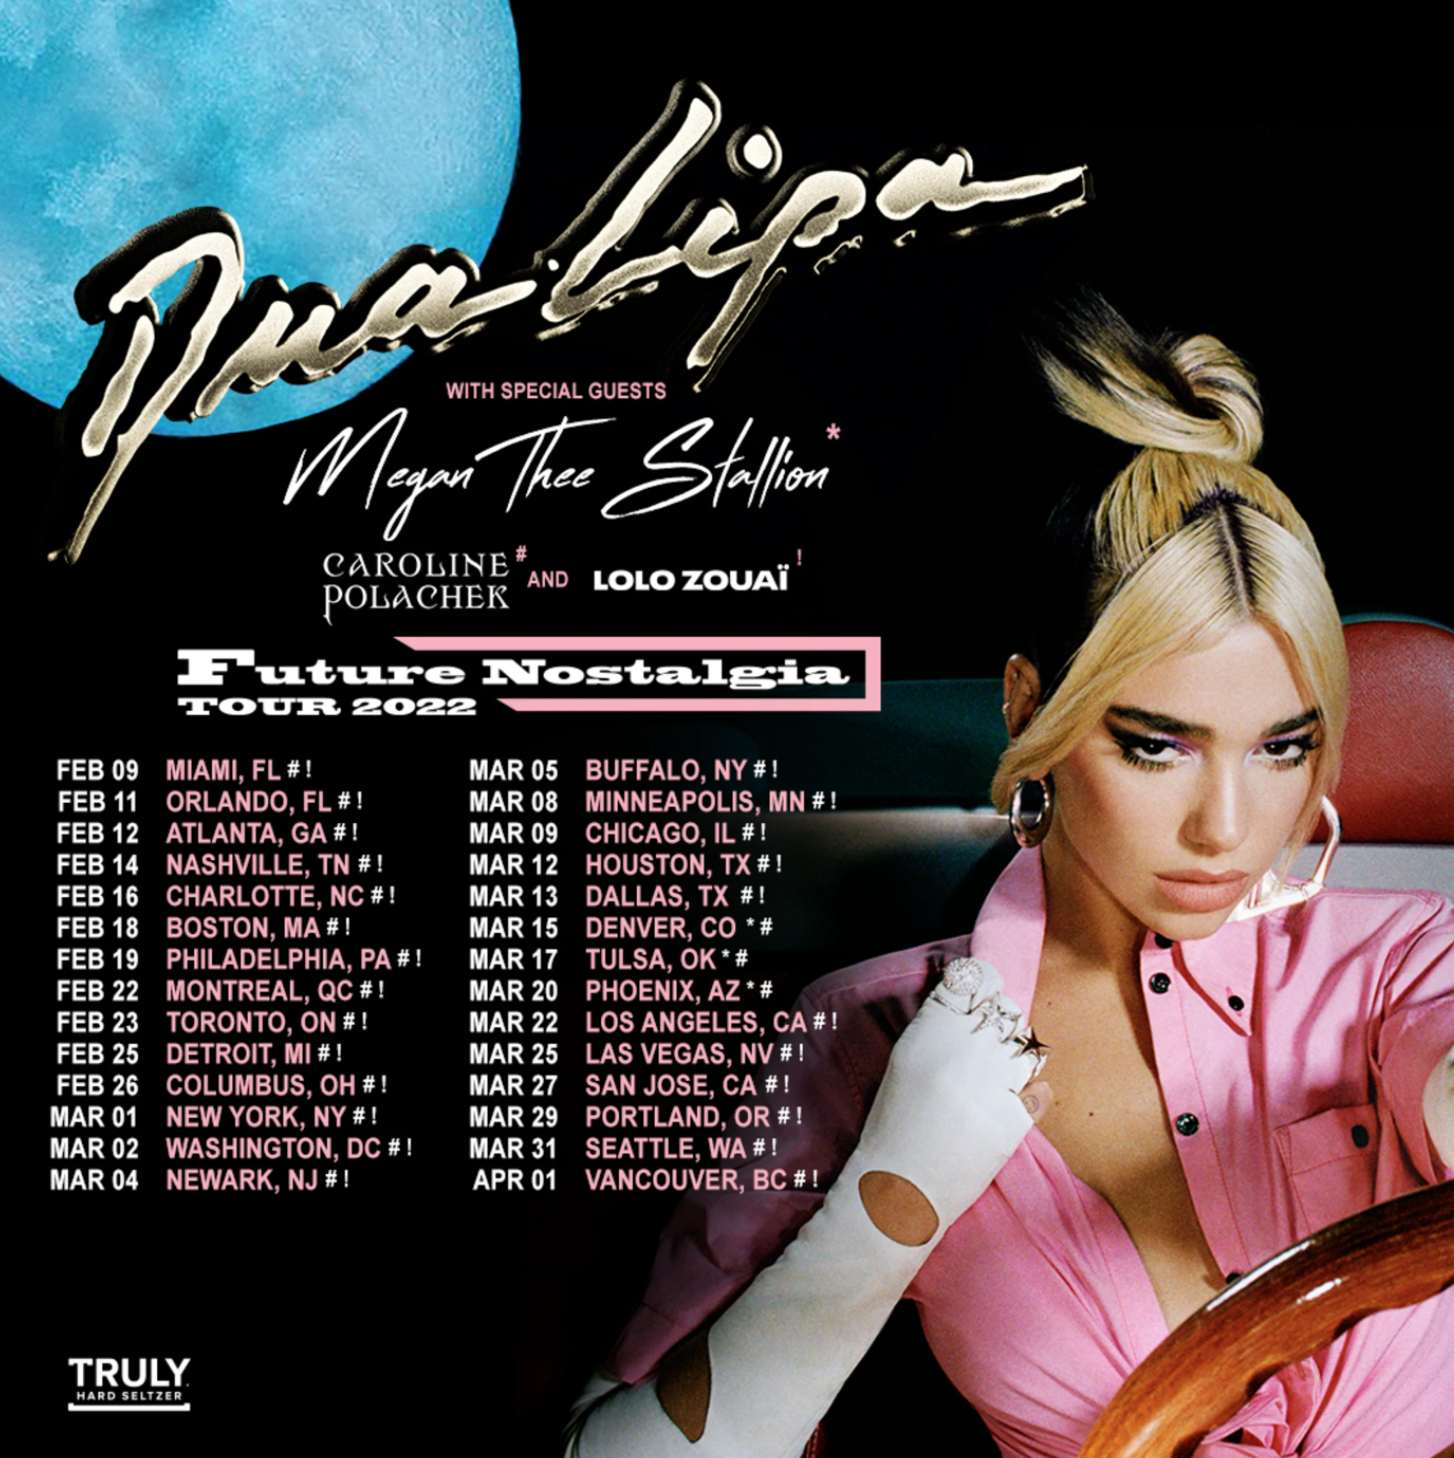 Dua Lipa&#x27;s flyer for her upcoming tour is shown